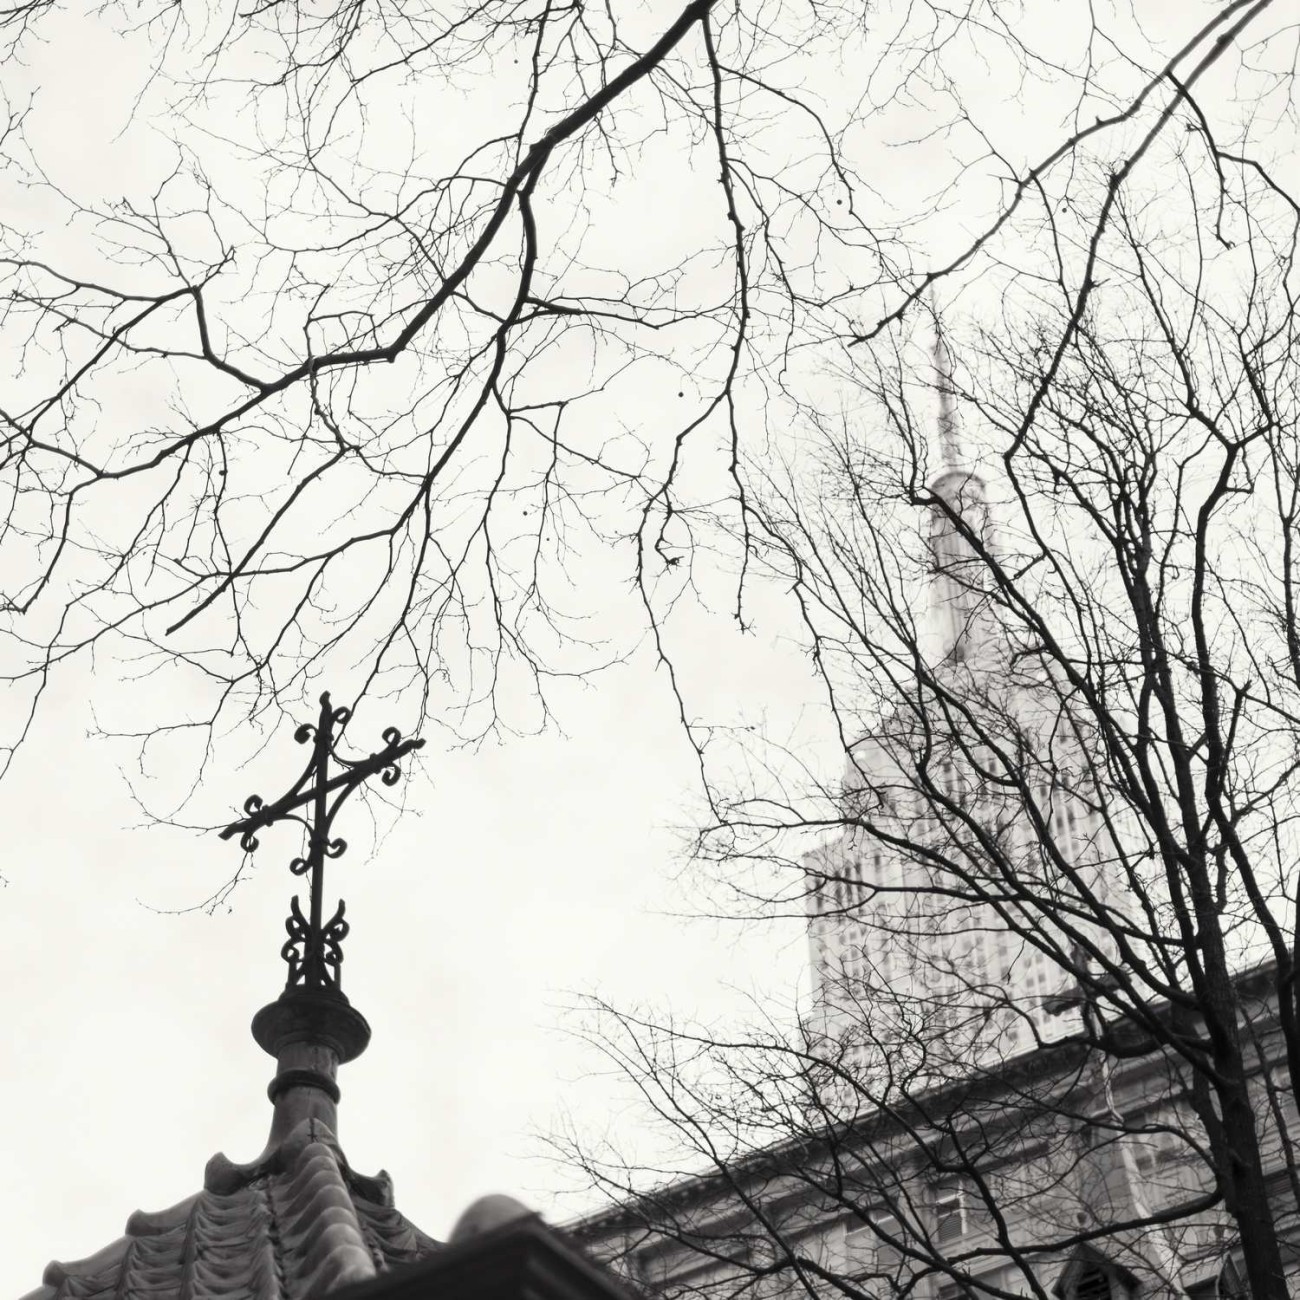 Two crosses and branches, New York, 2014